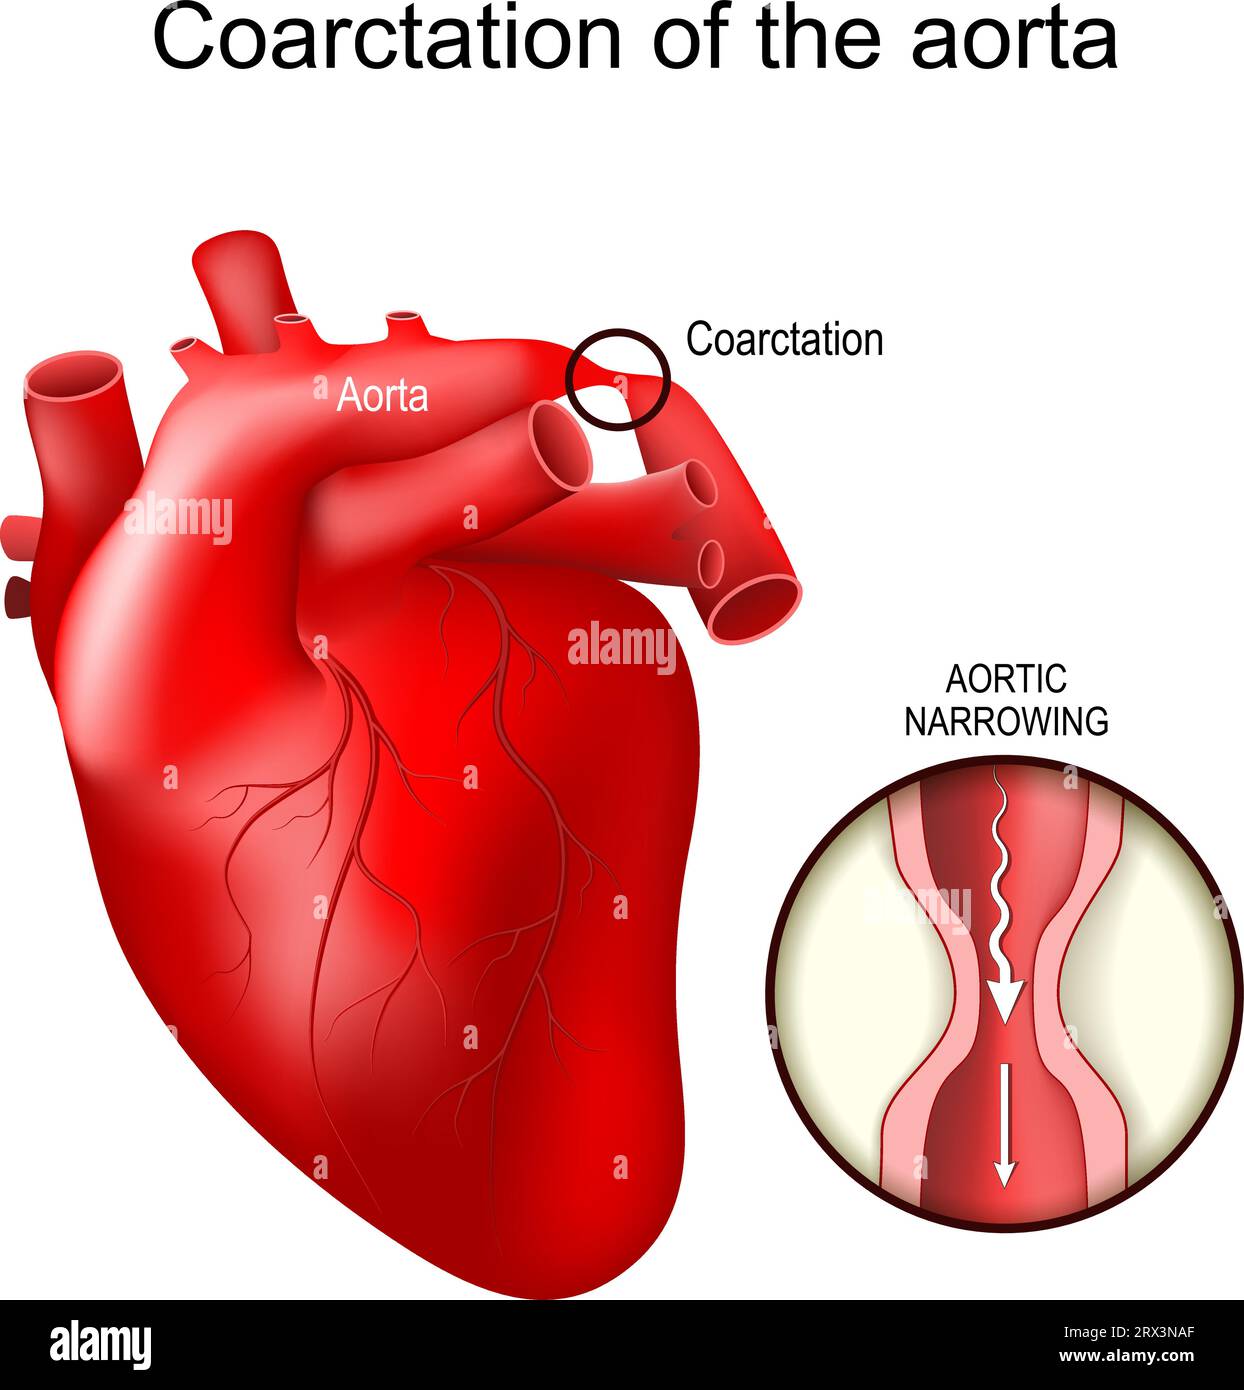 Aortic coarctations. Congenital heart defect. Close-up of cross section of aortic narrowing. Cardiovascular abnormalities. Stenosis of the aorta. vect Stock Vector